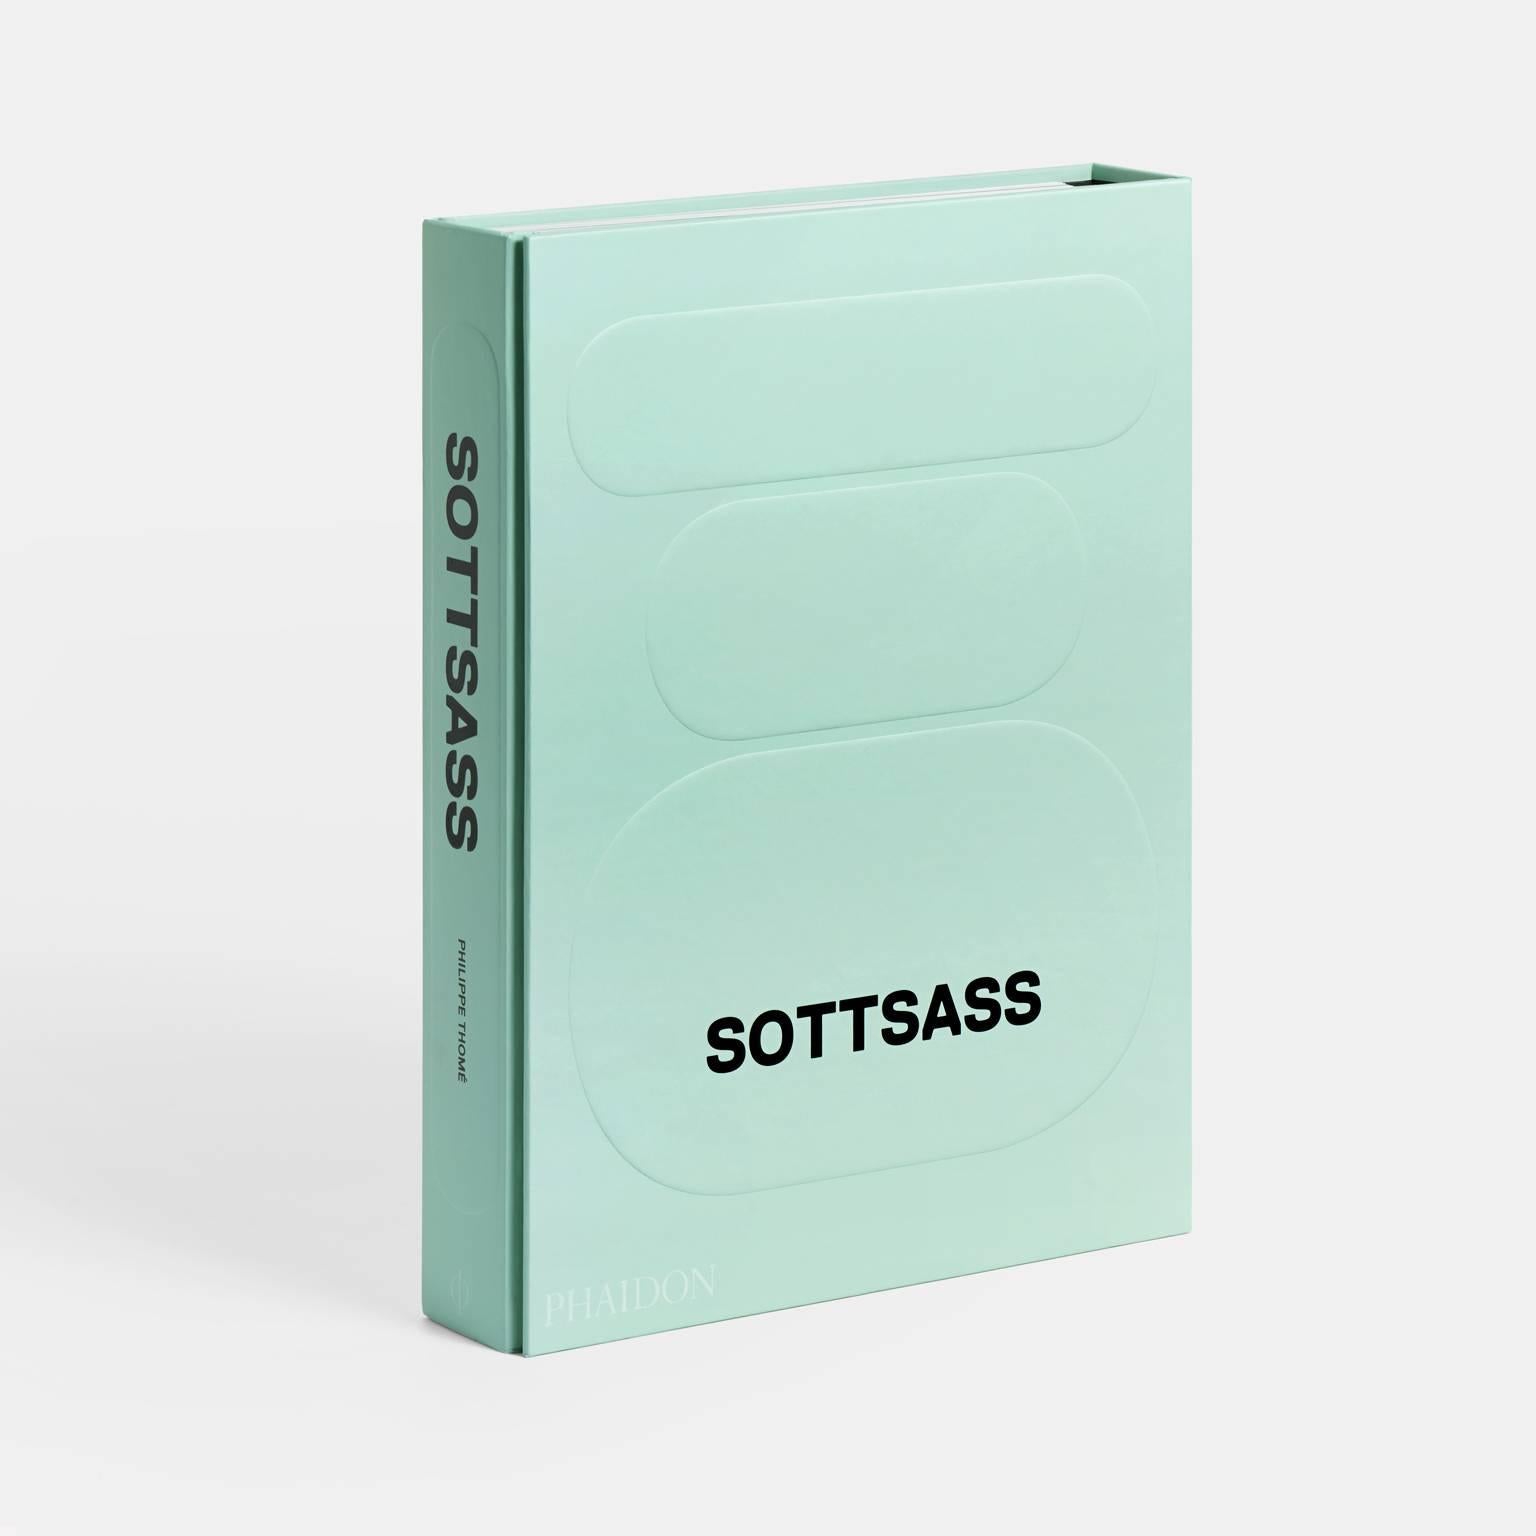 The collection includes: 

Ettore Sottsass: The ultimate monograph on influential Italian architect and designer Ettore Sottsass. 

Dieter Rams: As Little Design As Possible: The definitive monograph on Dieter Rams’ life, work and ideas.